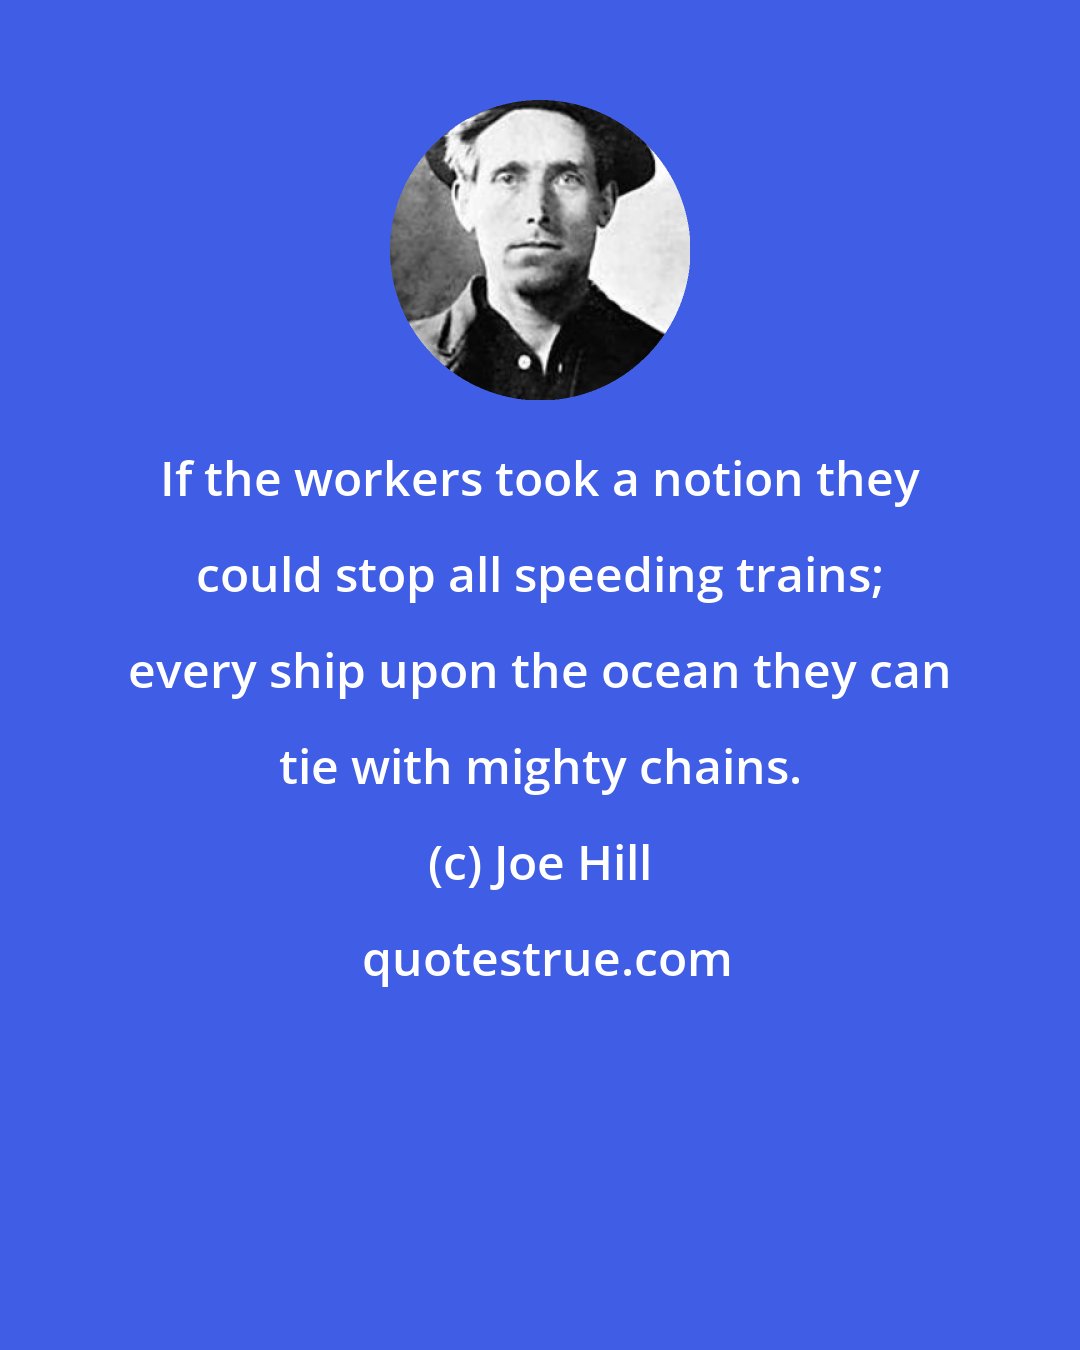 Joe Hill: If the workers took a notion they could stop all speeding trains; every ship upon the ocean they can tie with mighty chains.